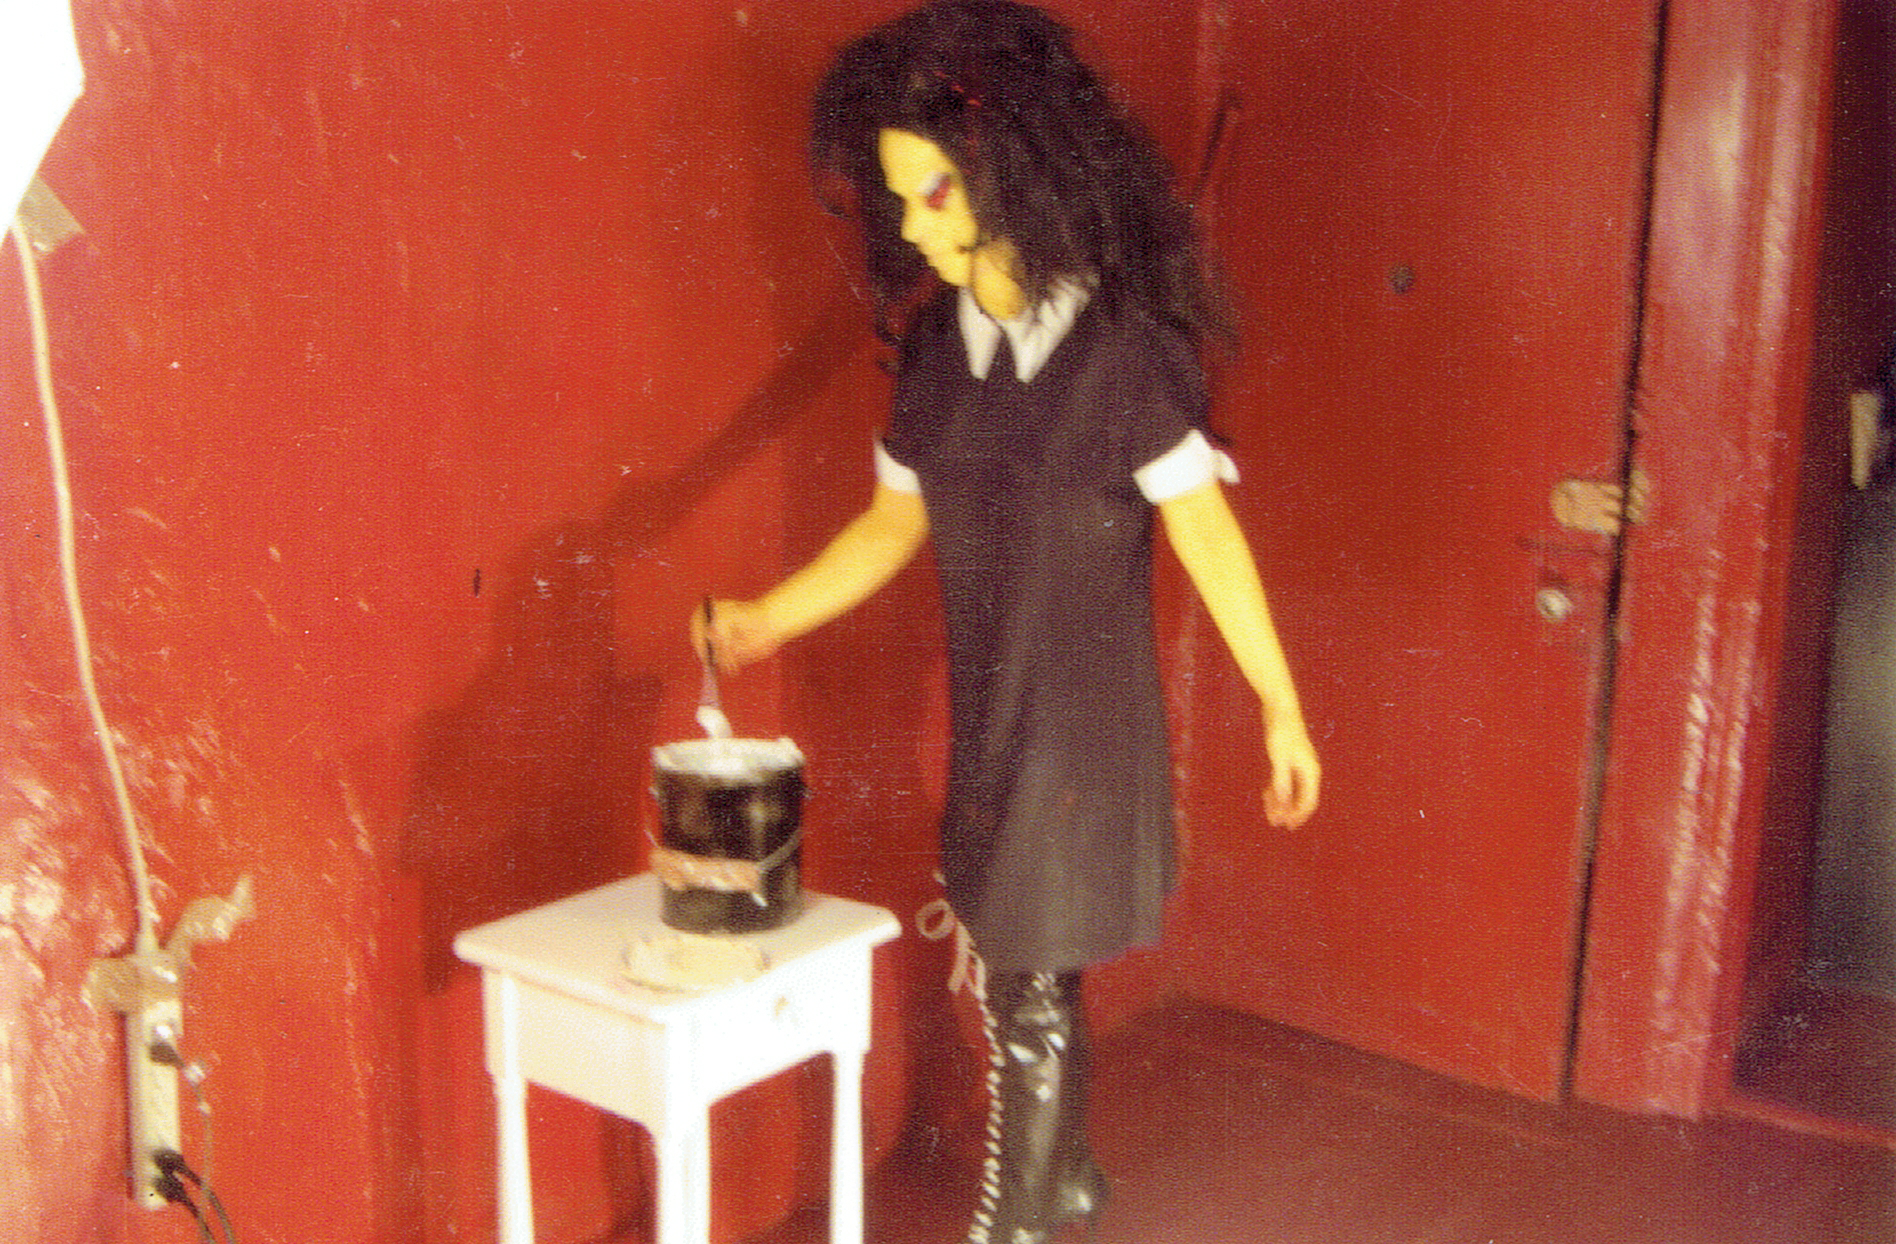 Kembra Pfahler, *On the Record / Off the Record*, photo: Rosalie Knox